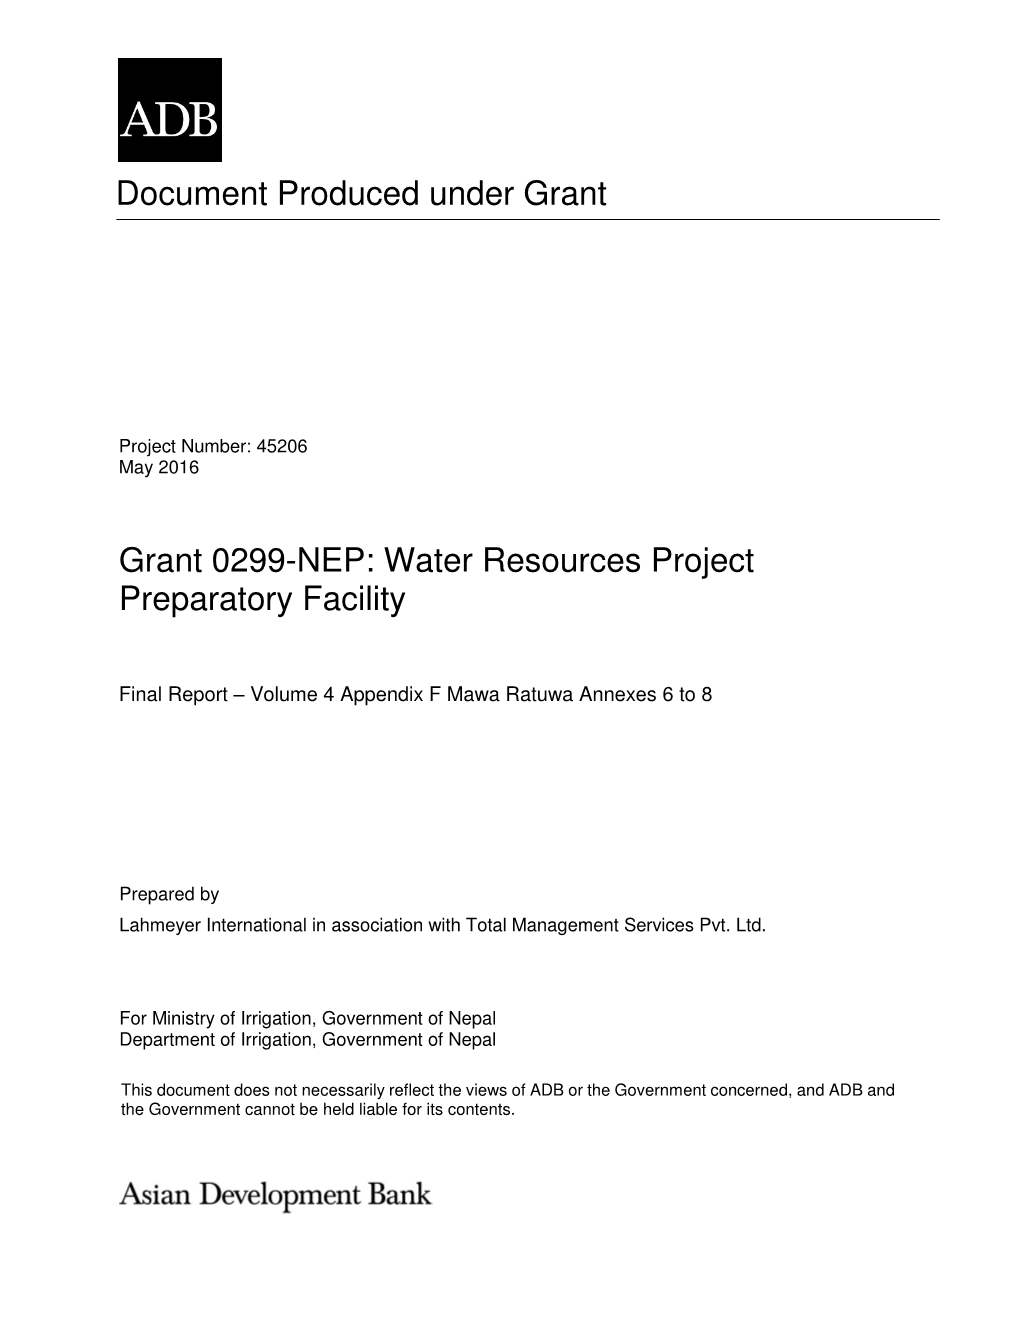 Water Resources Project Preparatory Facility